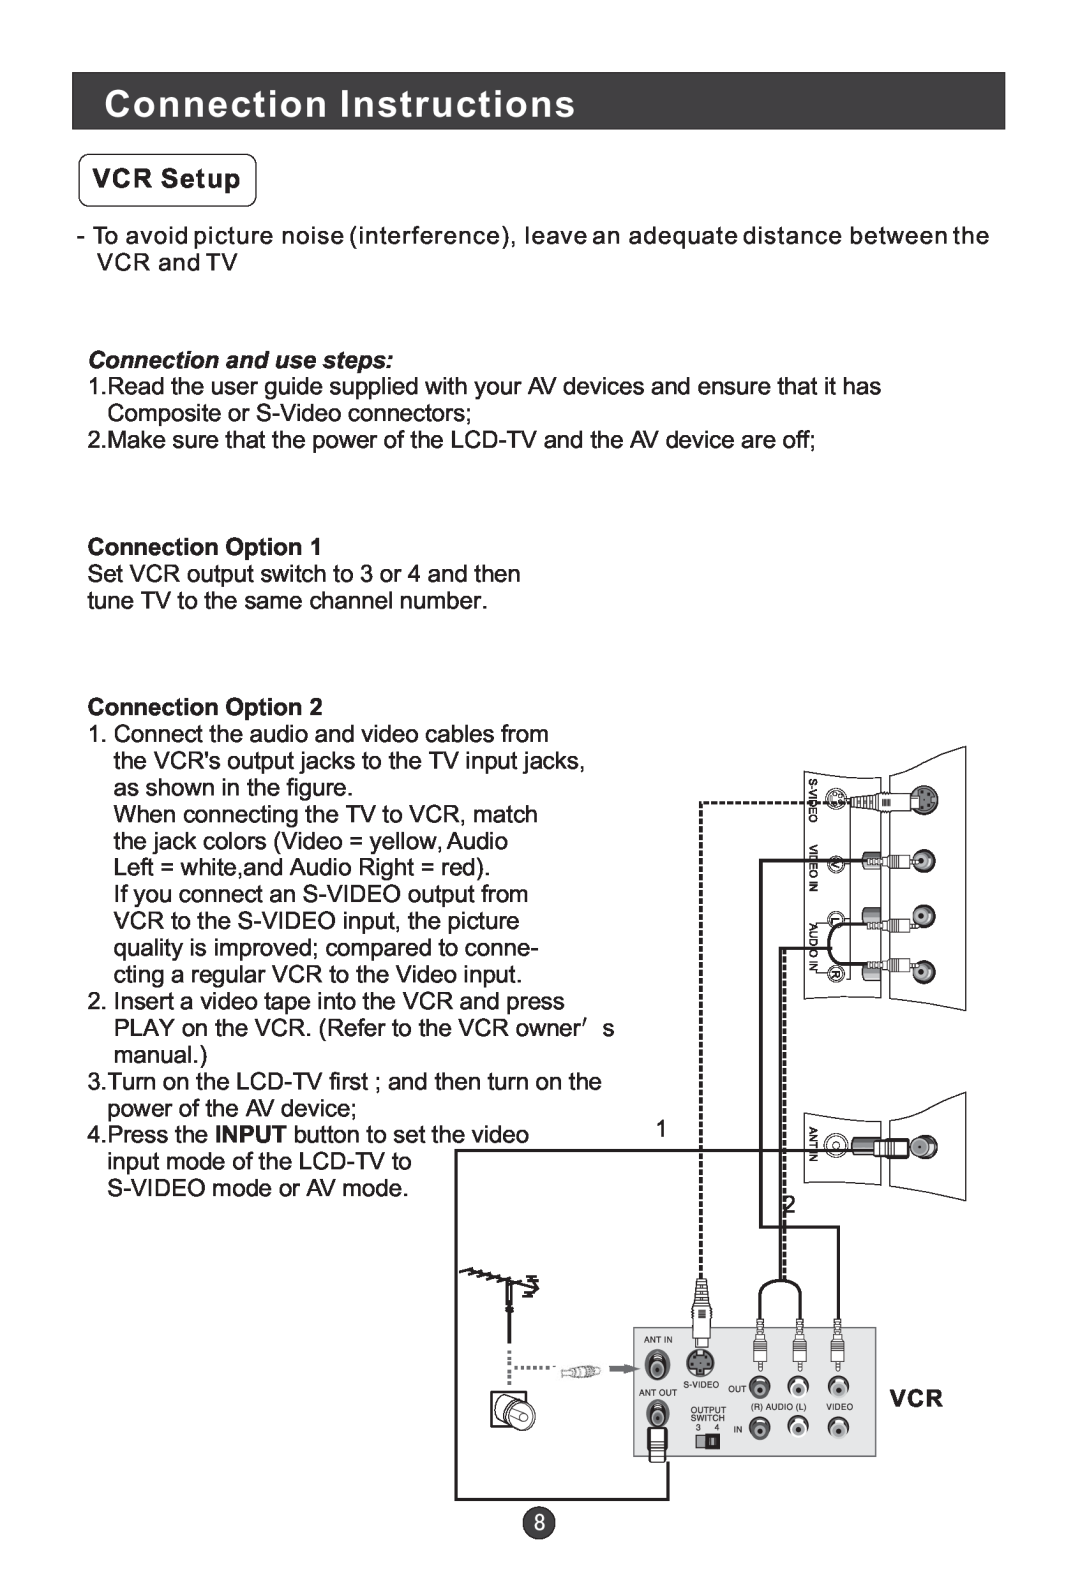 Haier HL15B user manual Connection Instructions, VCR Setup, Connection and use steps 